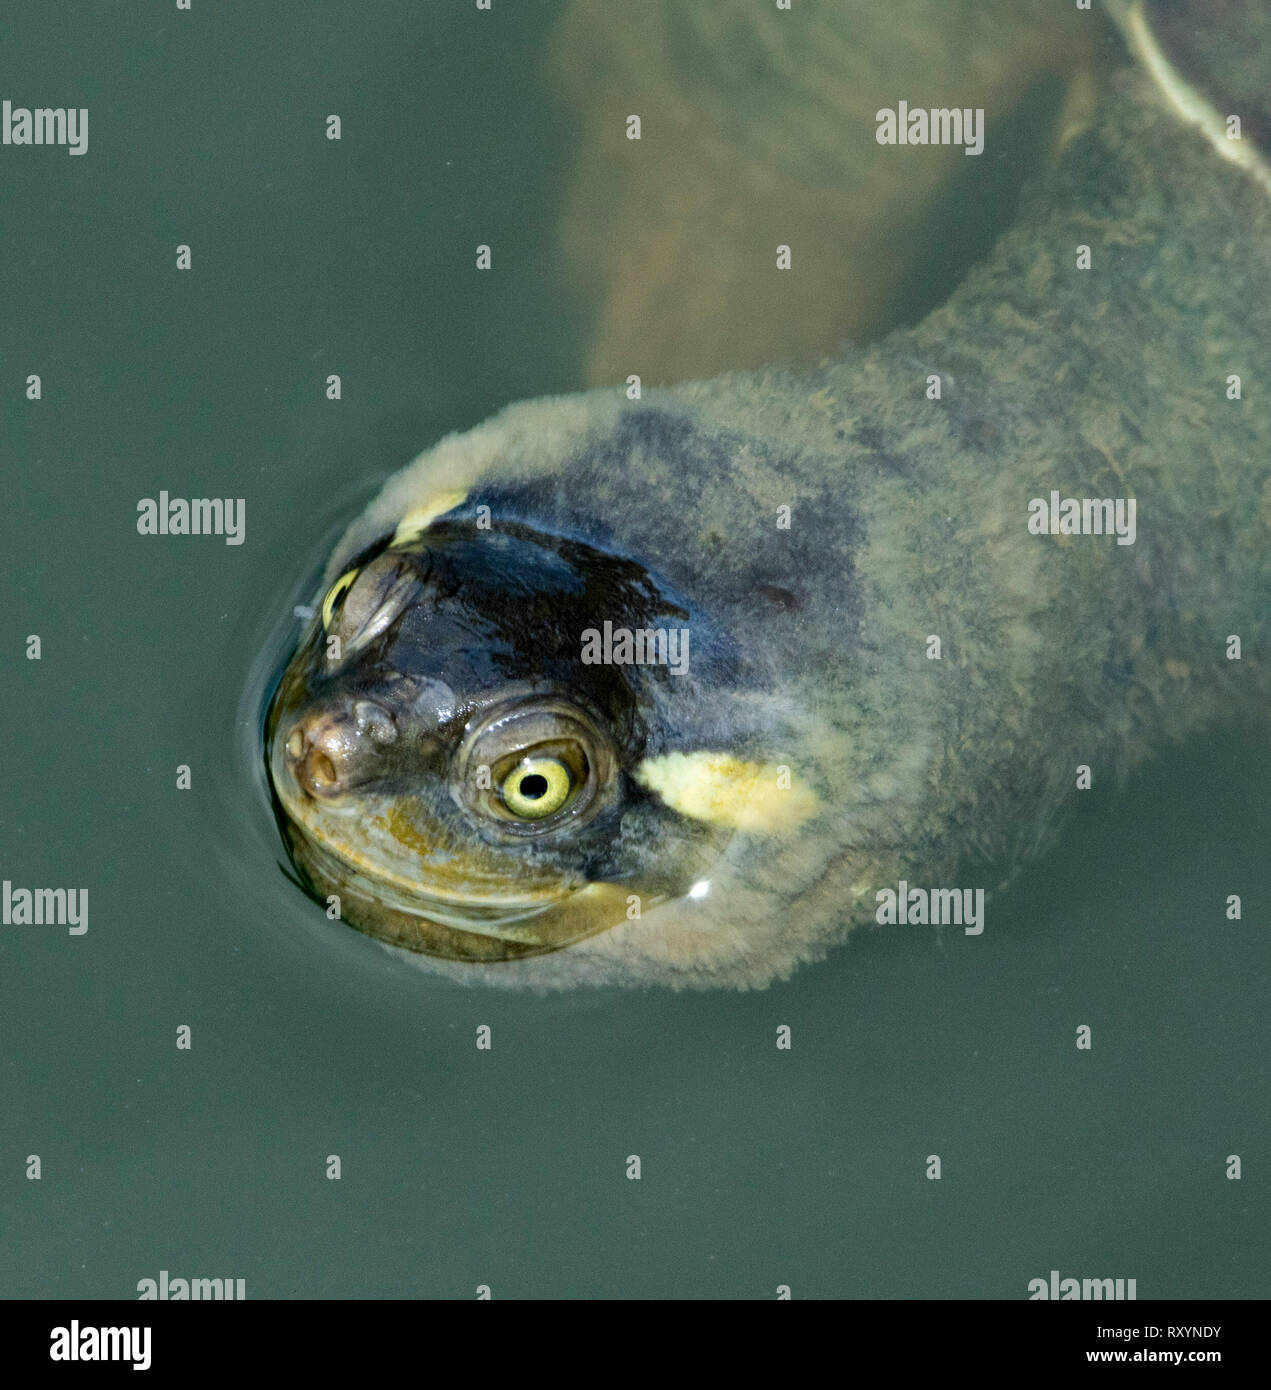 Close up of face of Krefft's river turtle, Emydura krefftii, with algae on head and yellow eyes peering from water of lake Stock Photo